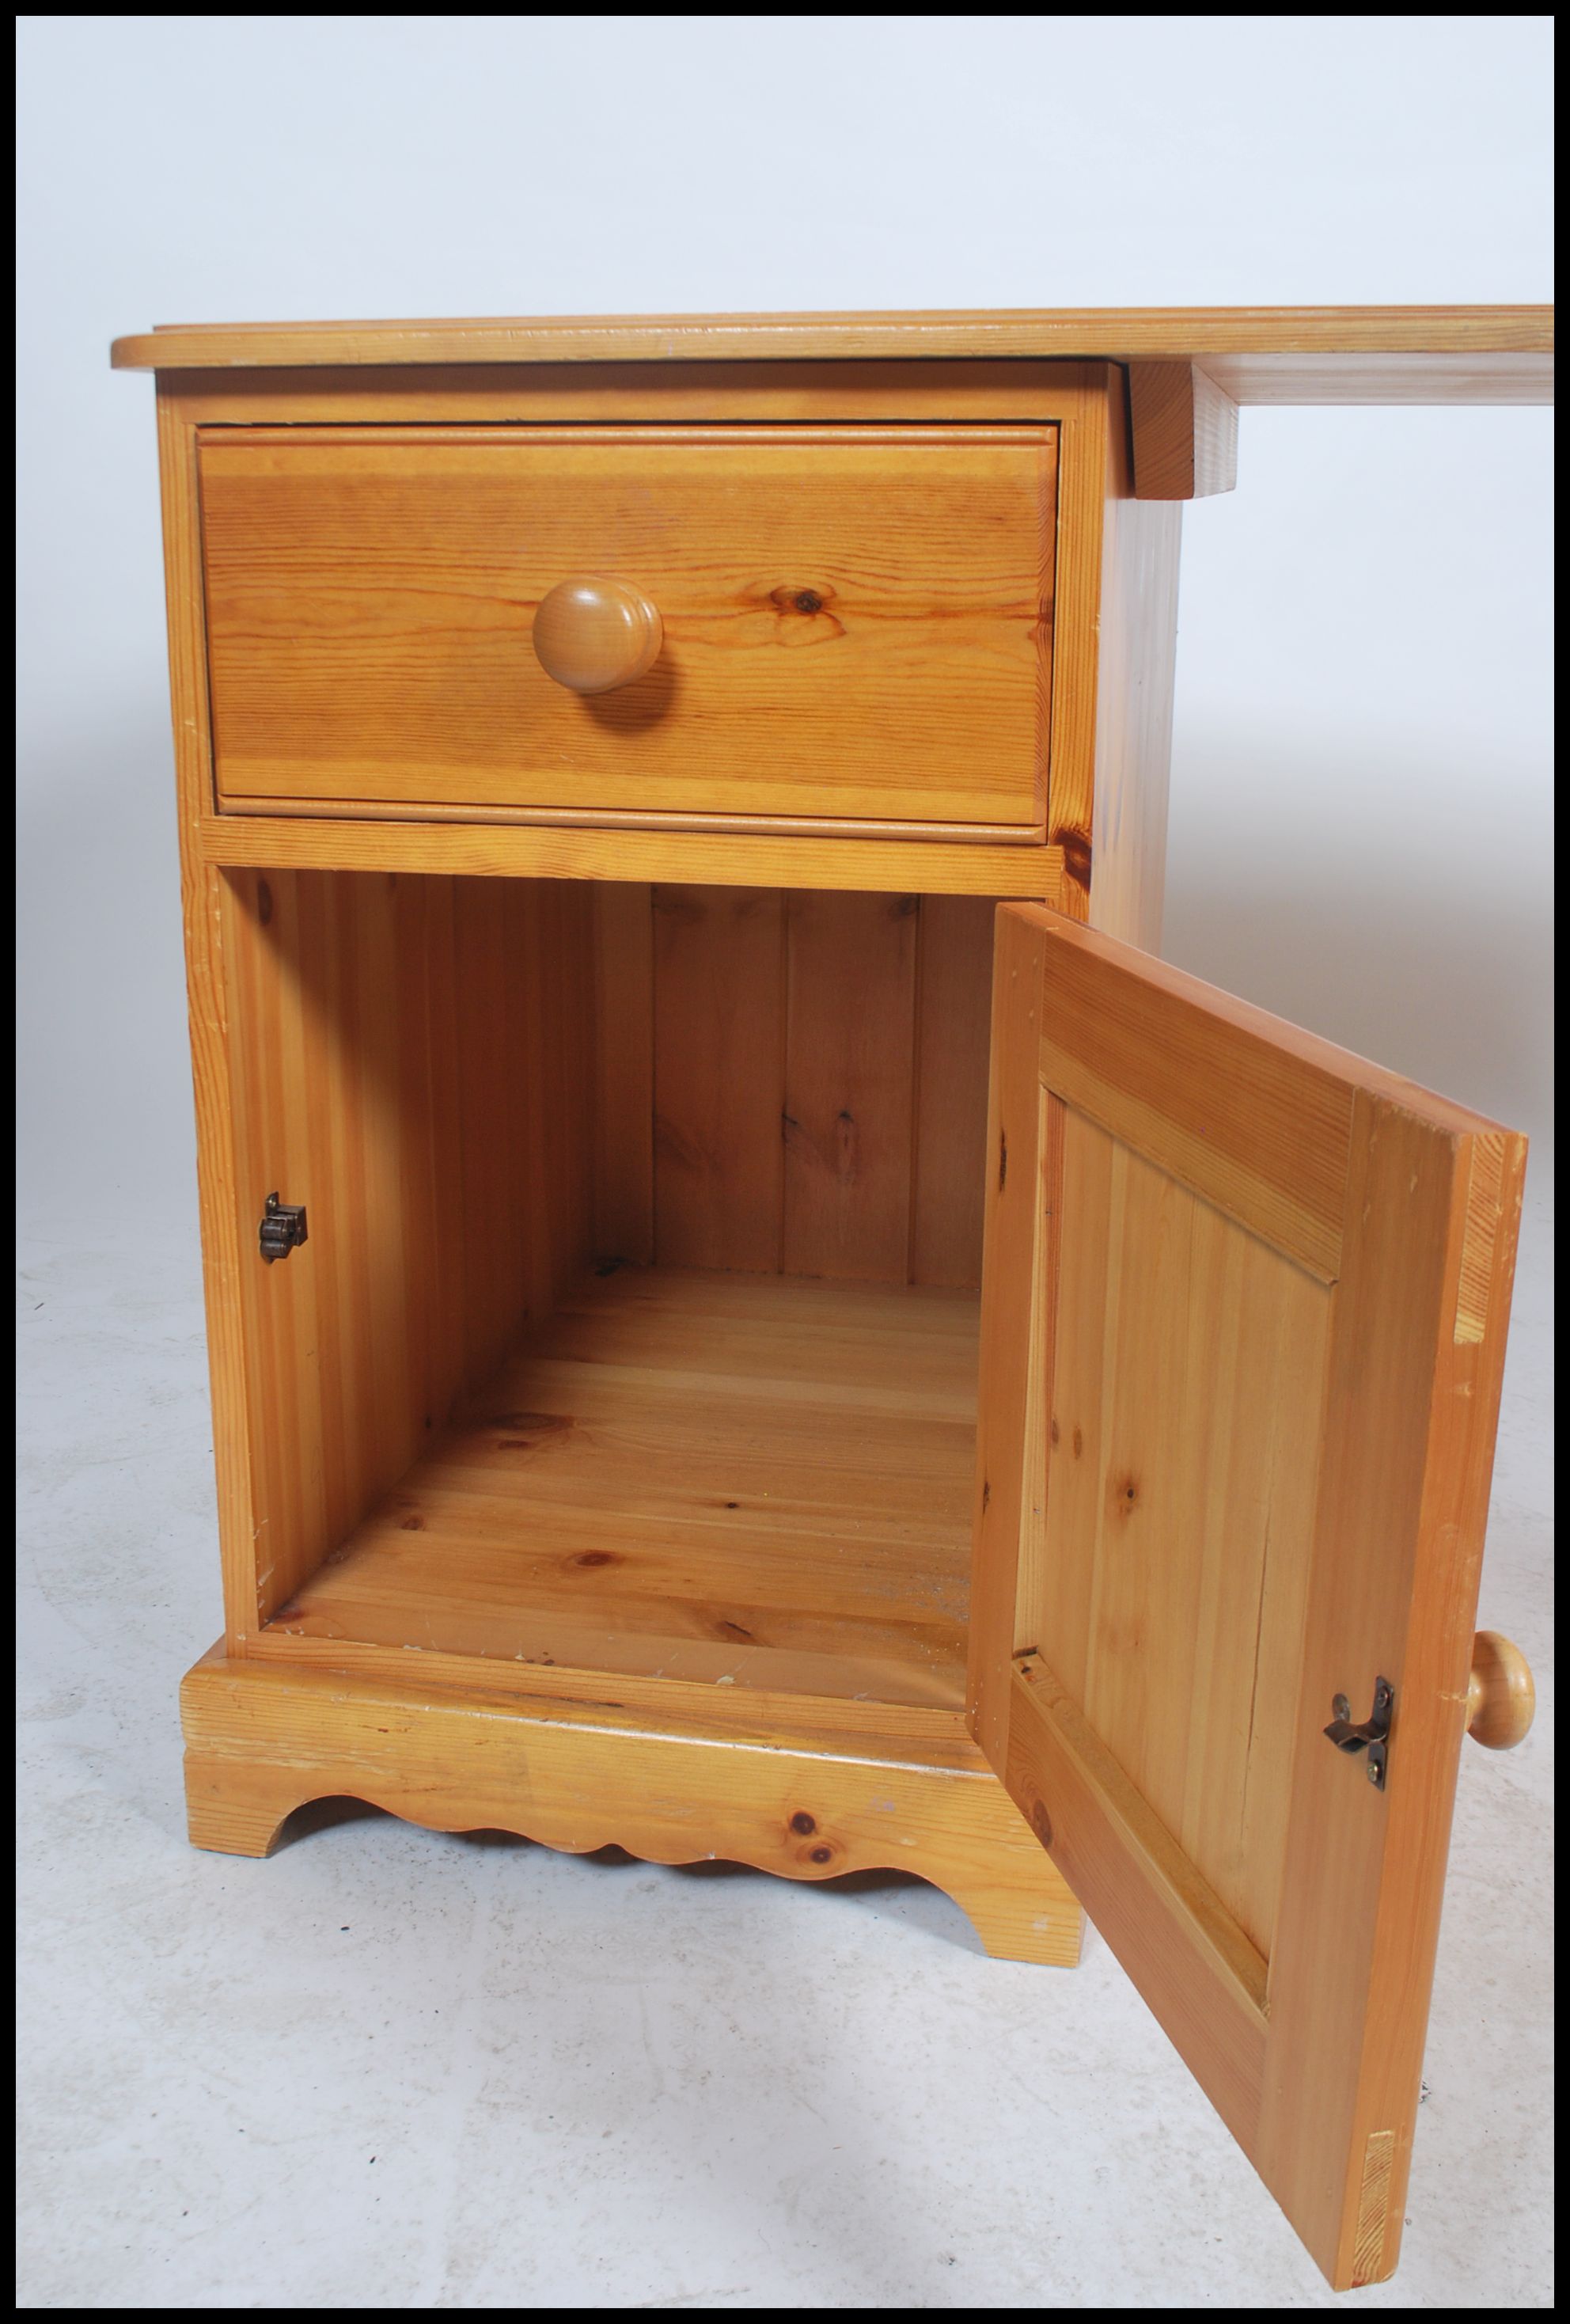 A 20th century contemporary twin pedestal pine knee hole desk having an arrangement of drawers - Image 4 of 5